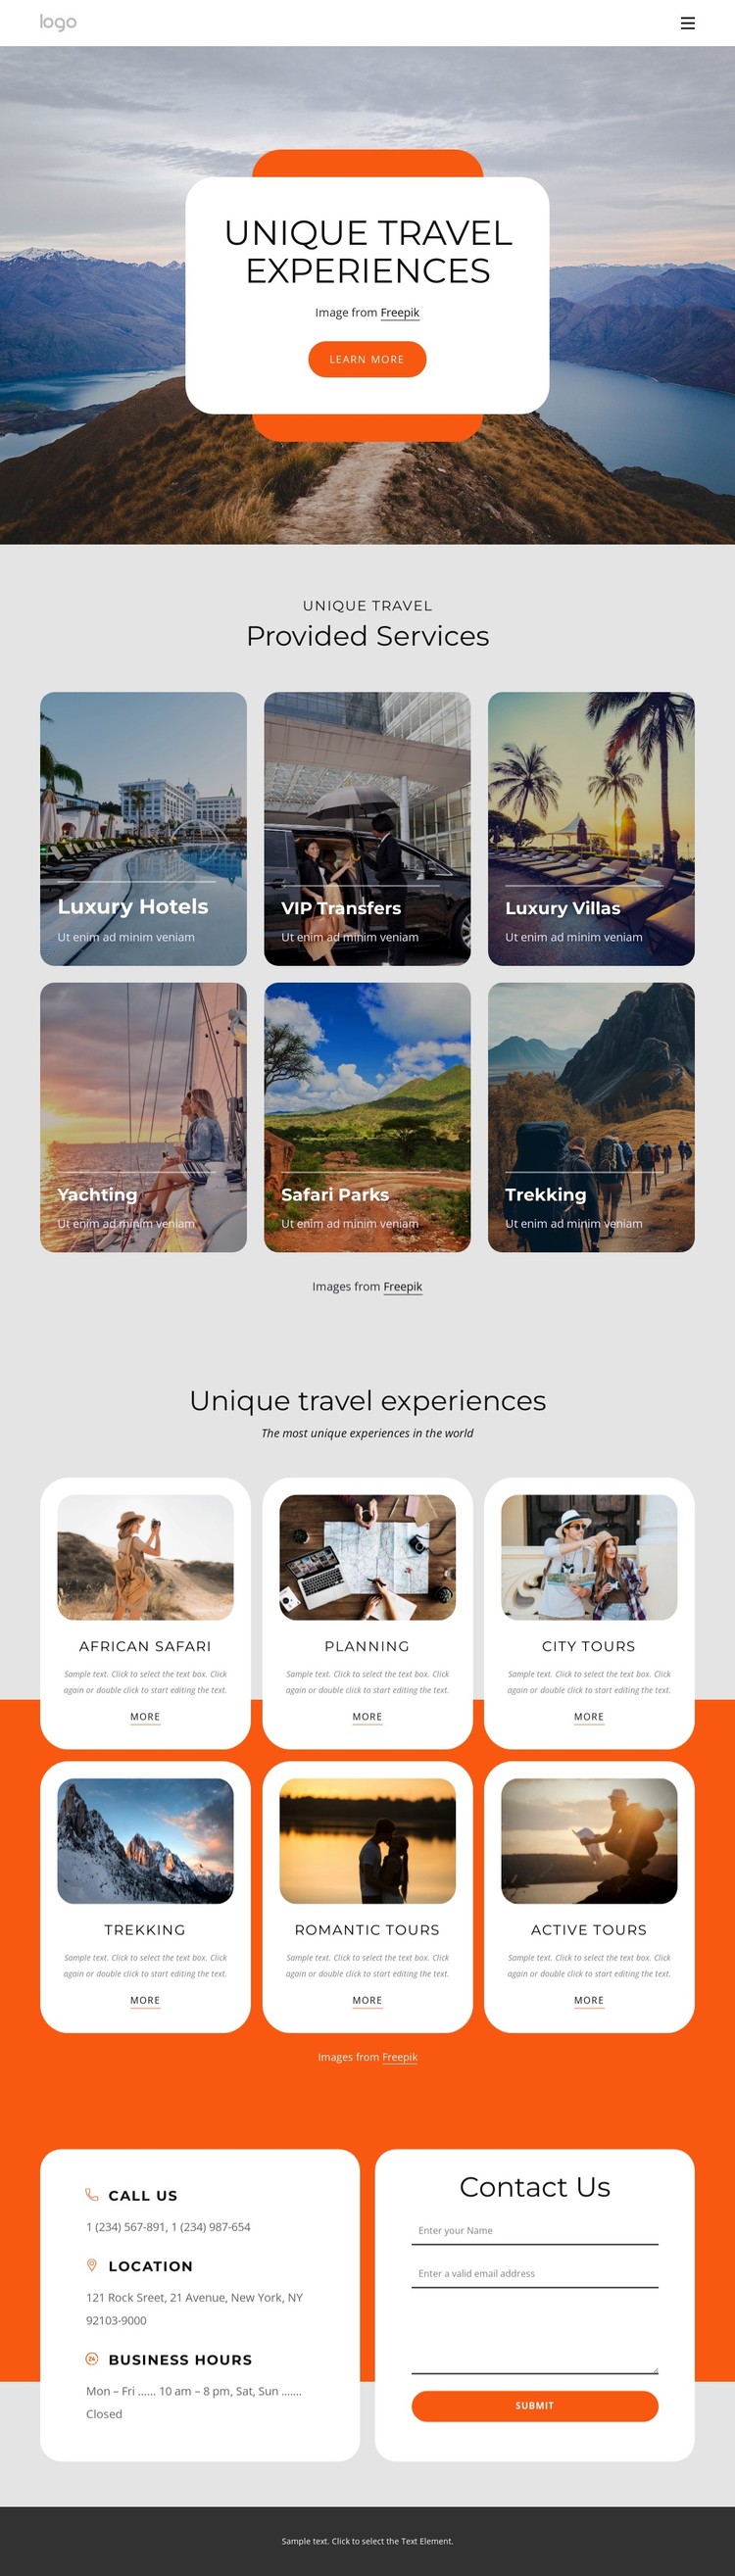 Luxury small-group travel experience Static Site Generator